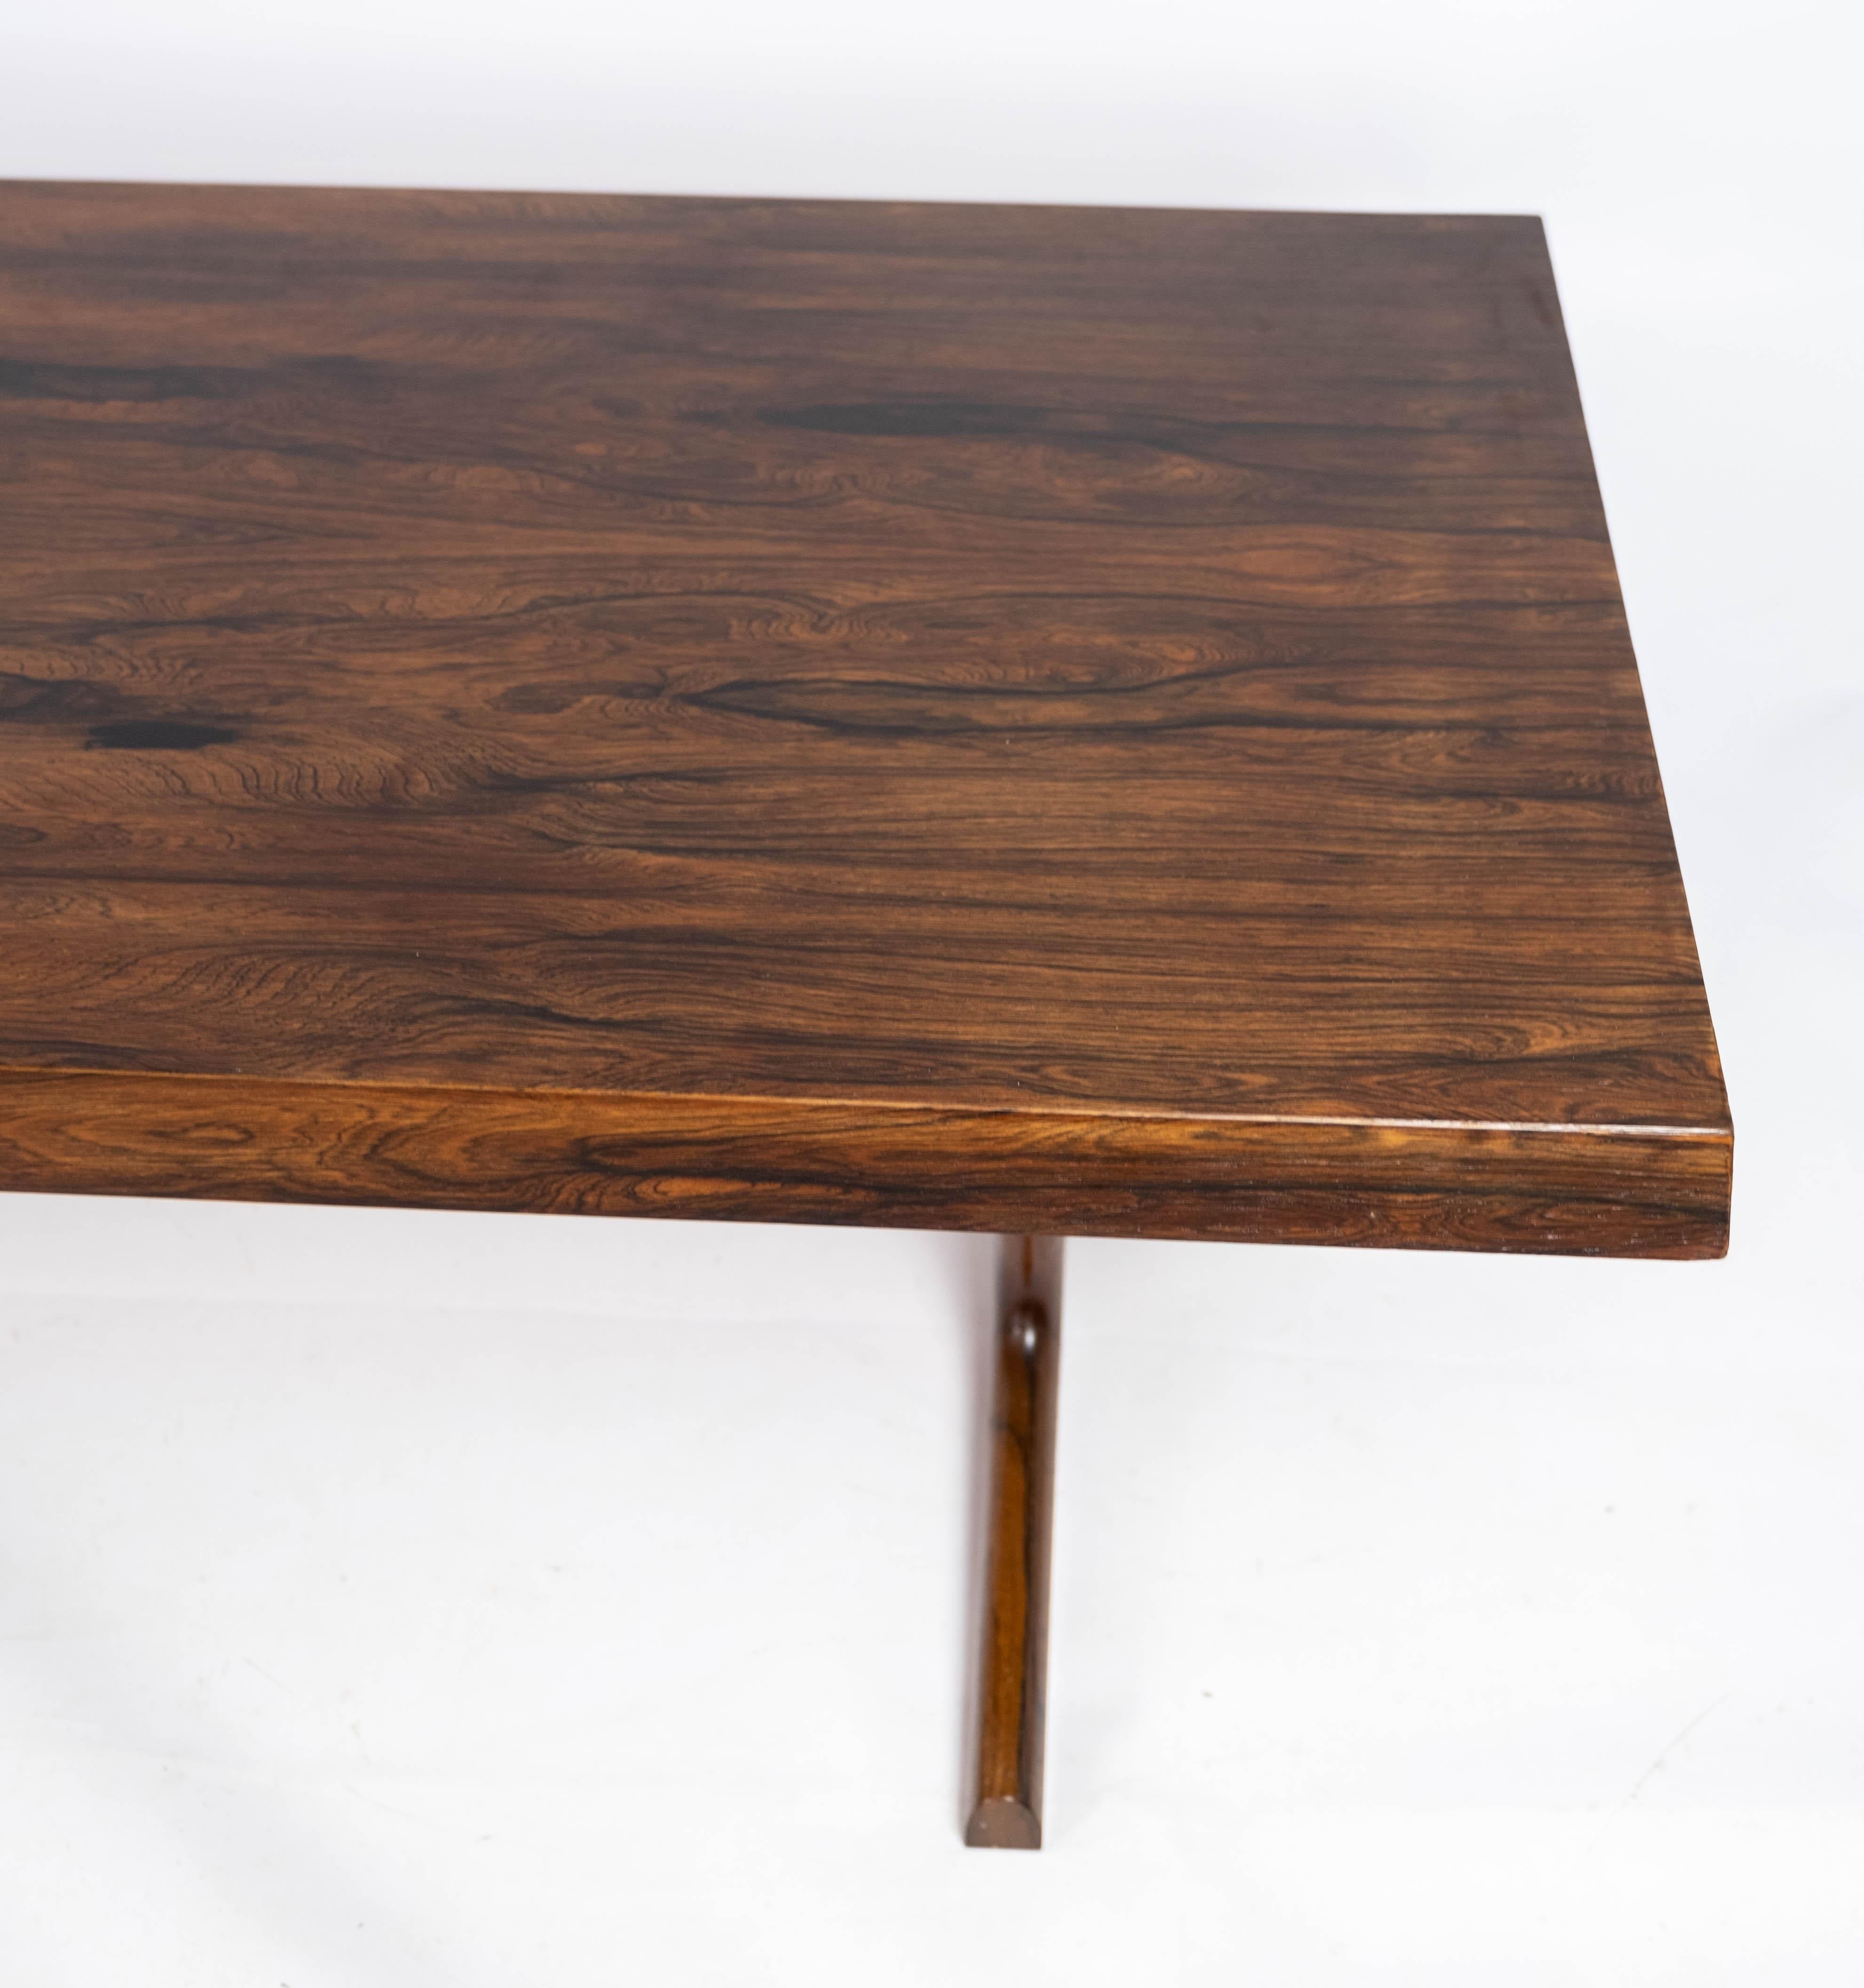 Mid-Century Modern Coffee Table Made In Rosewood With Shaker Legs, Danish Design From 1960s For Sale